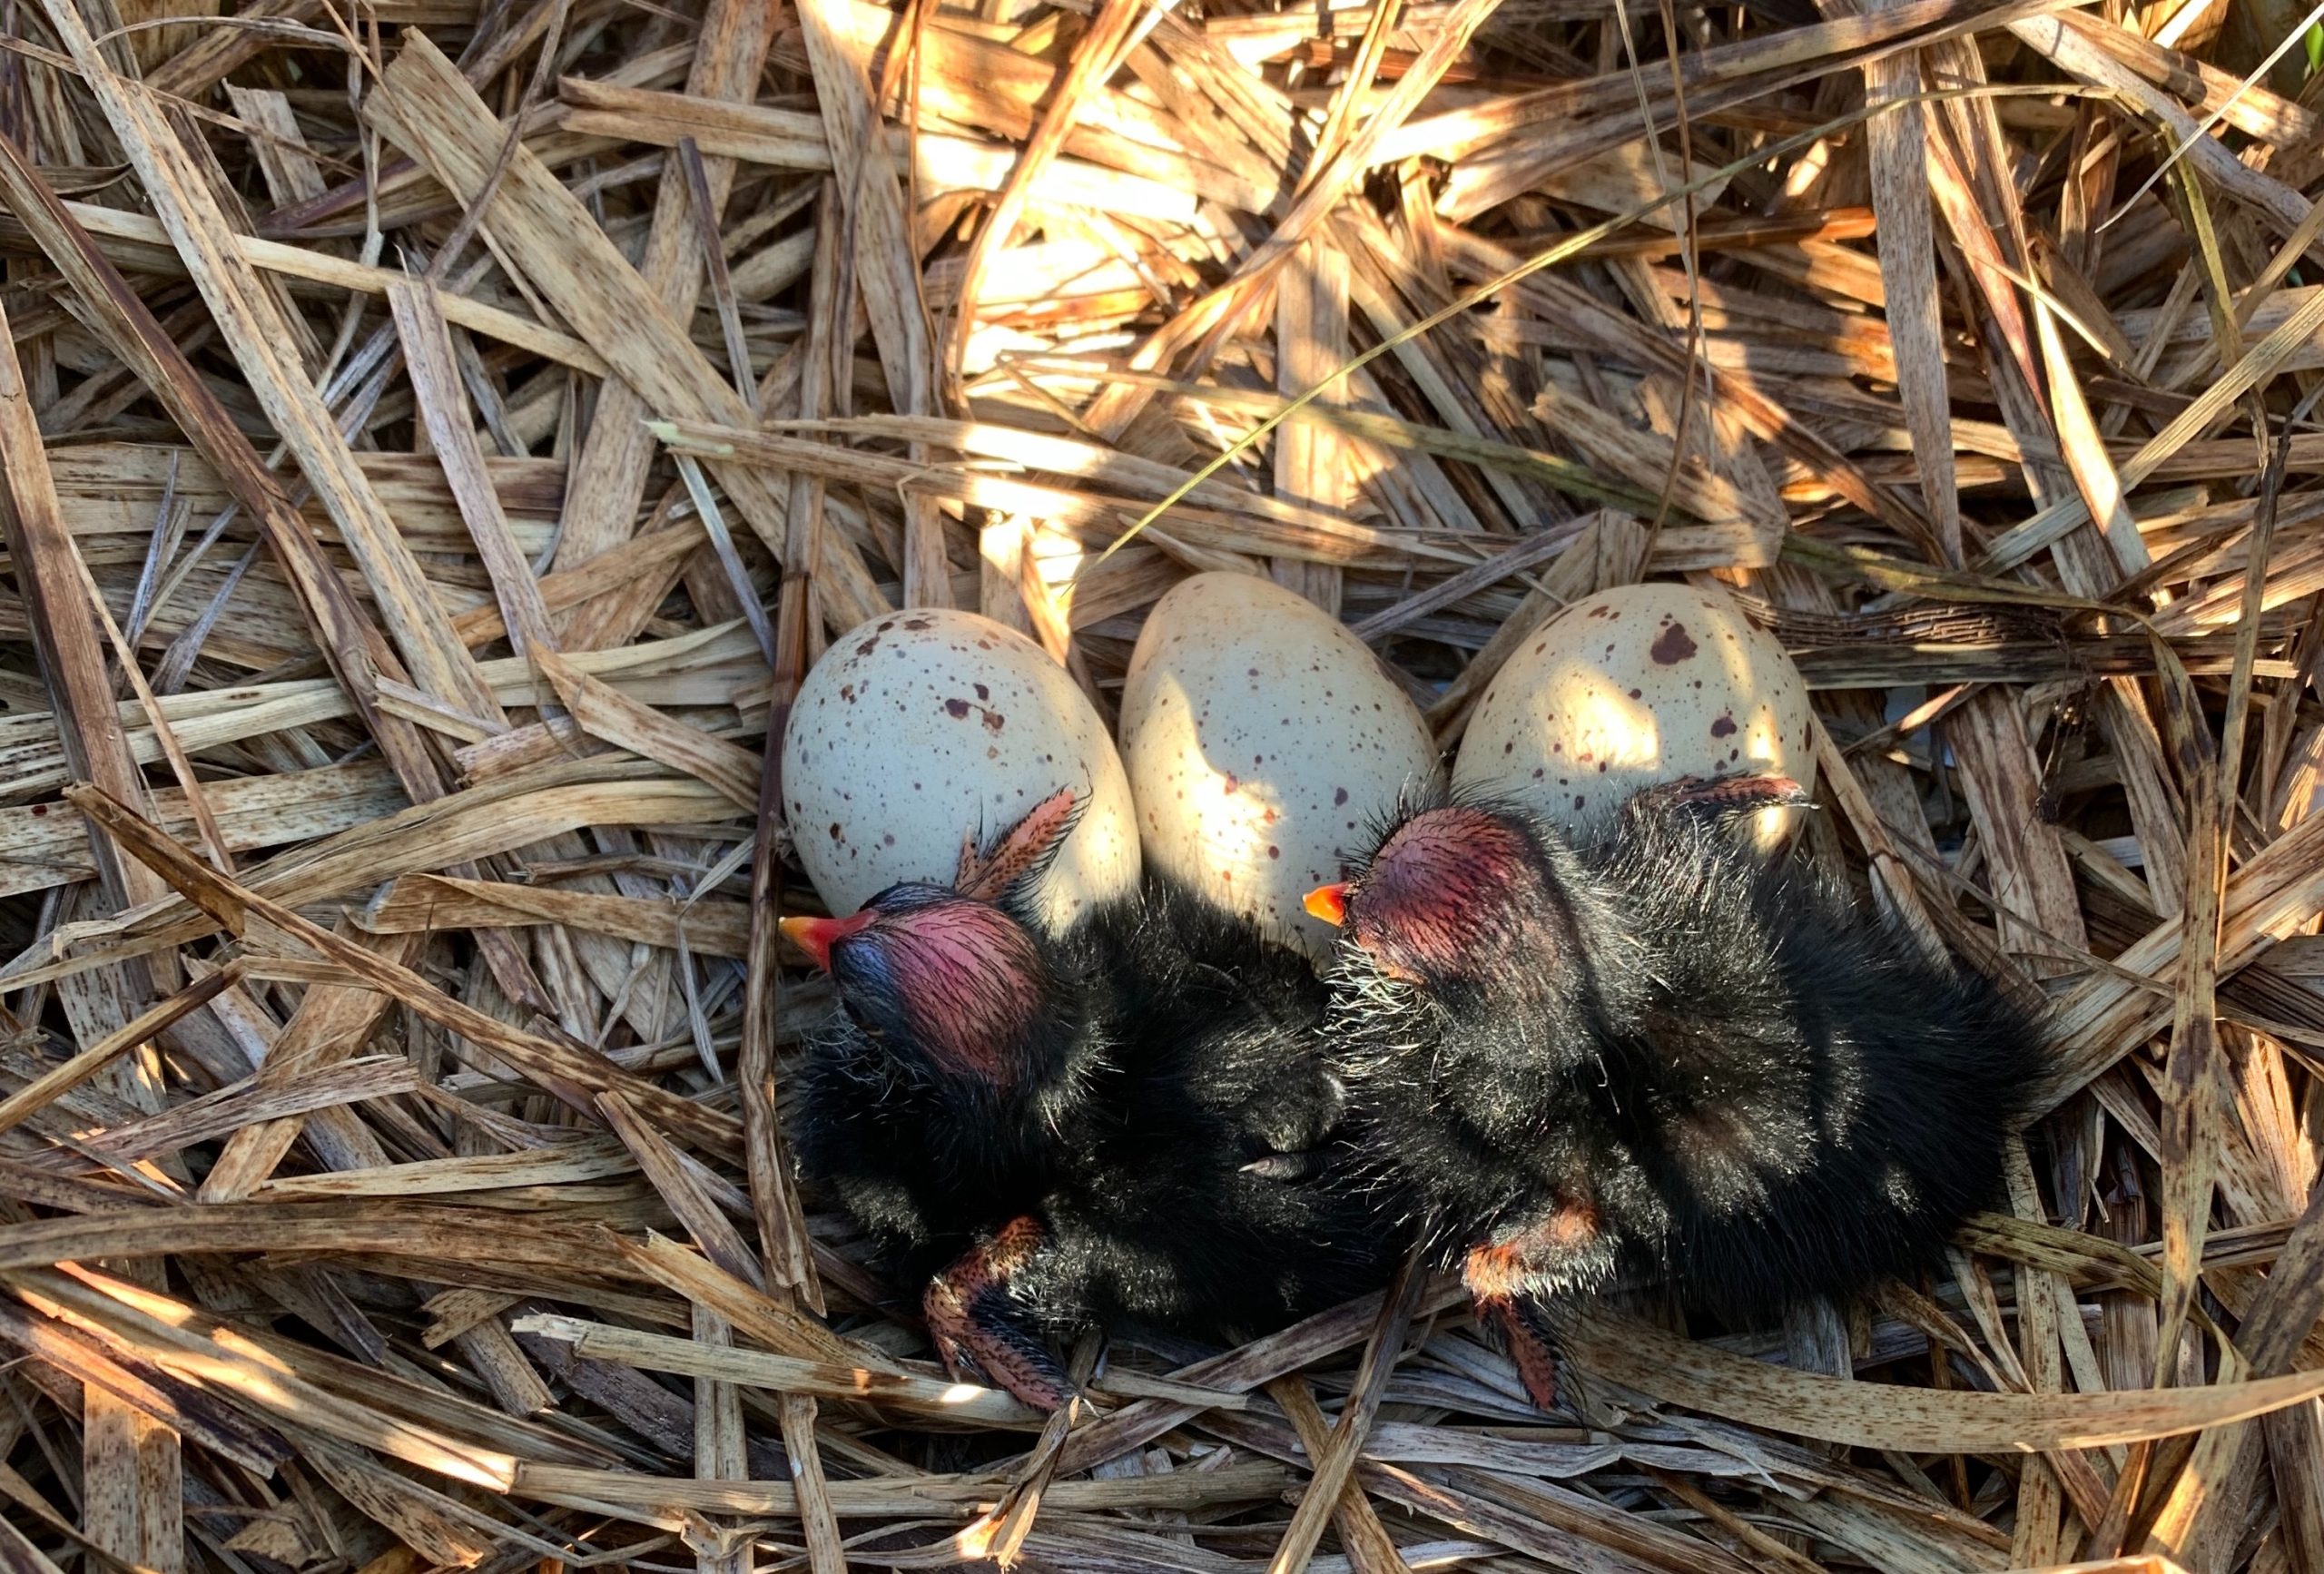 ‘Alae ‘ula chicks successfully hatched. The chicks are still vulnerablet to predation and other threats, necessitating ongoing wetland management.<br>© Hawaiʻi Department of Natural Resources